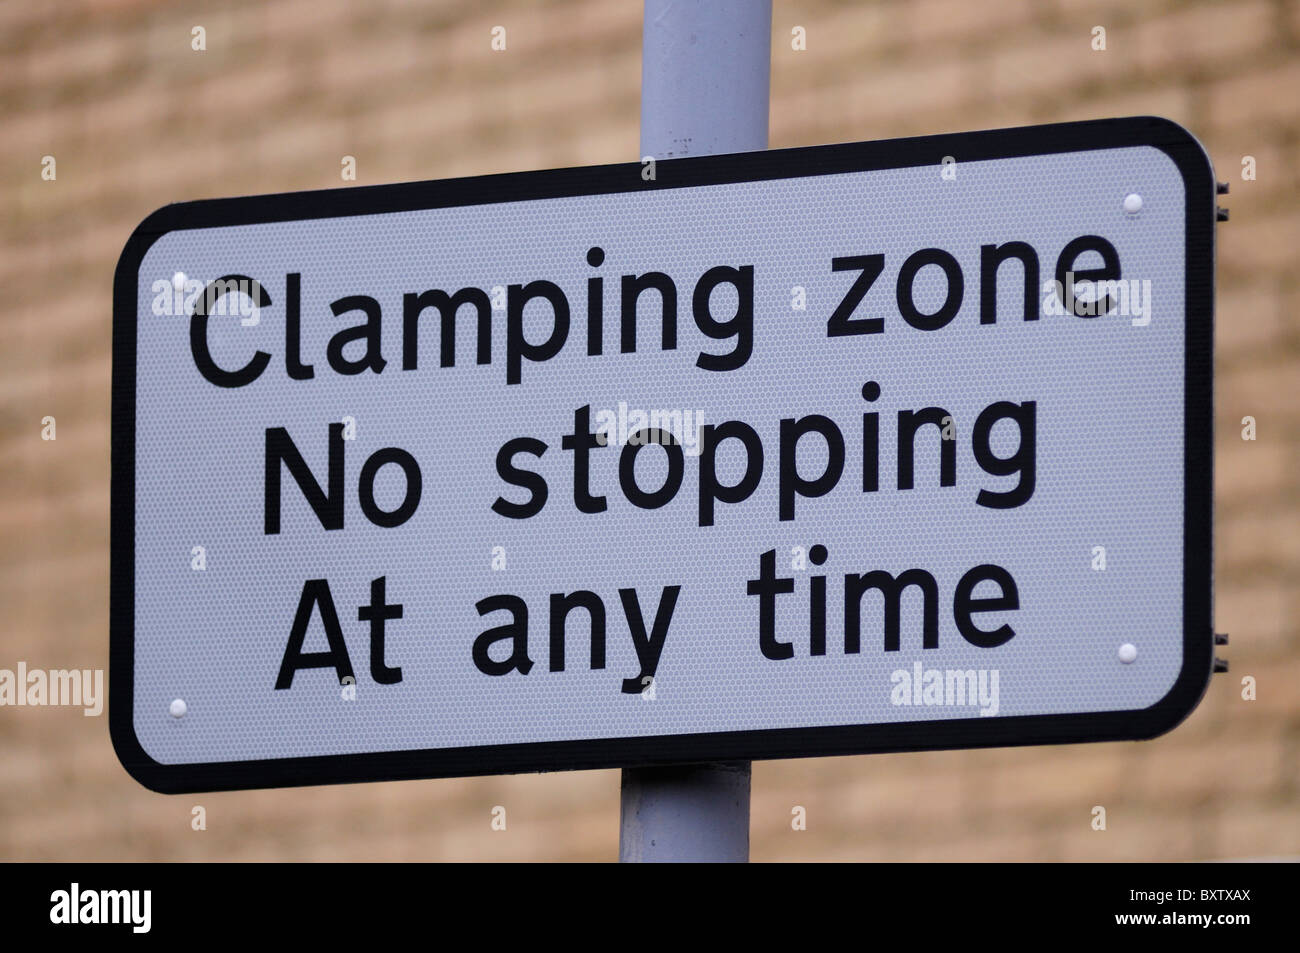 Clamping Zone No Stopping at Any Time sign, Cambridge, England, UK Stock Photo